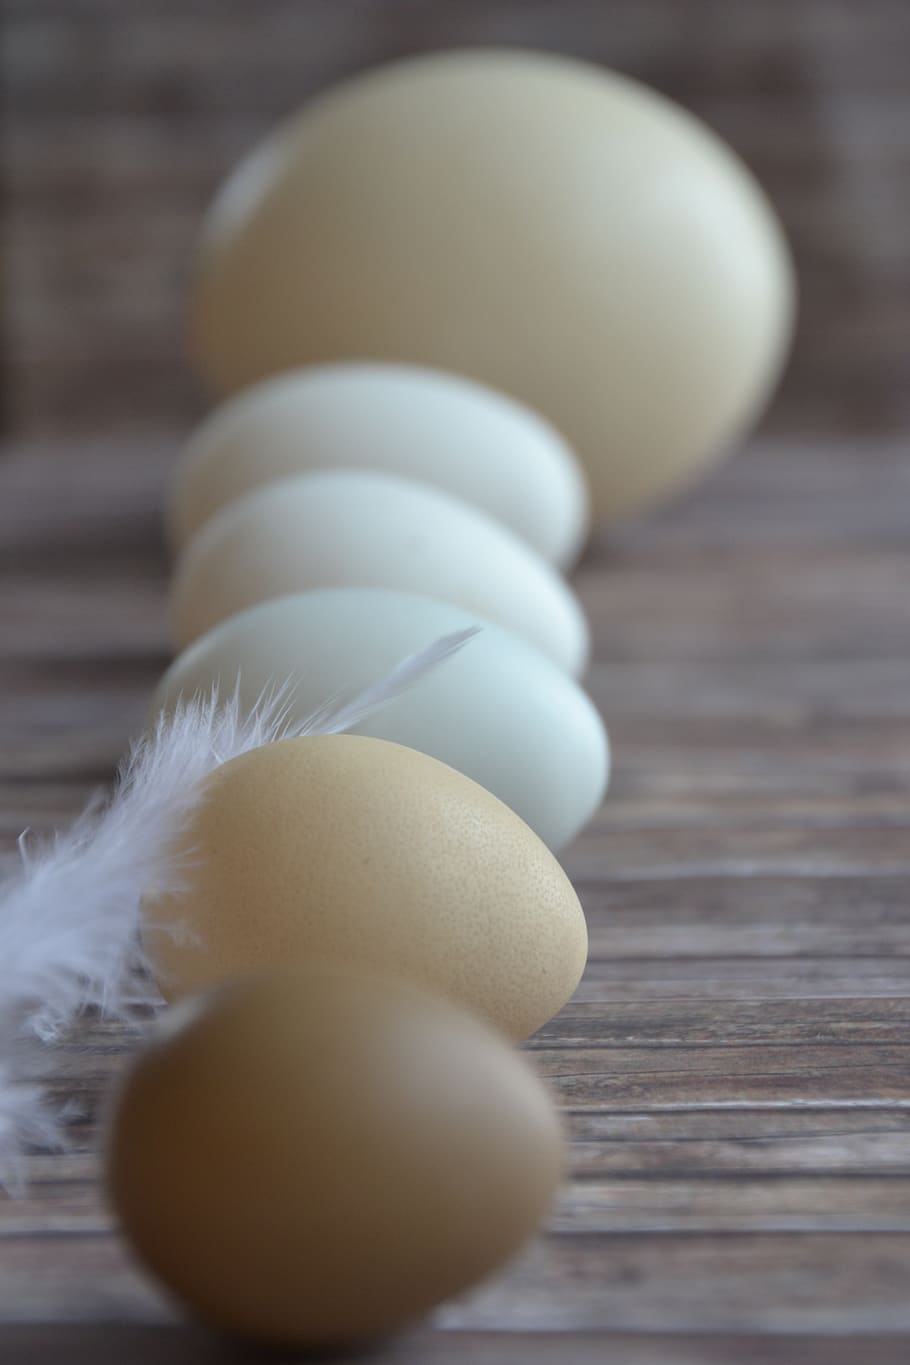 Eggs in a row with a feather - Egg